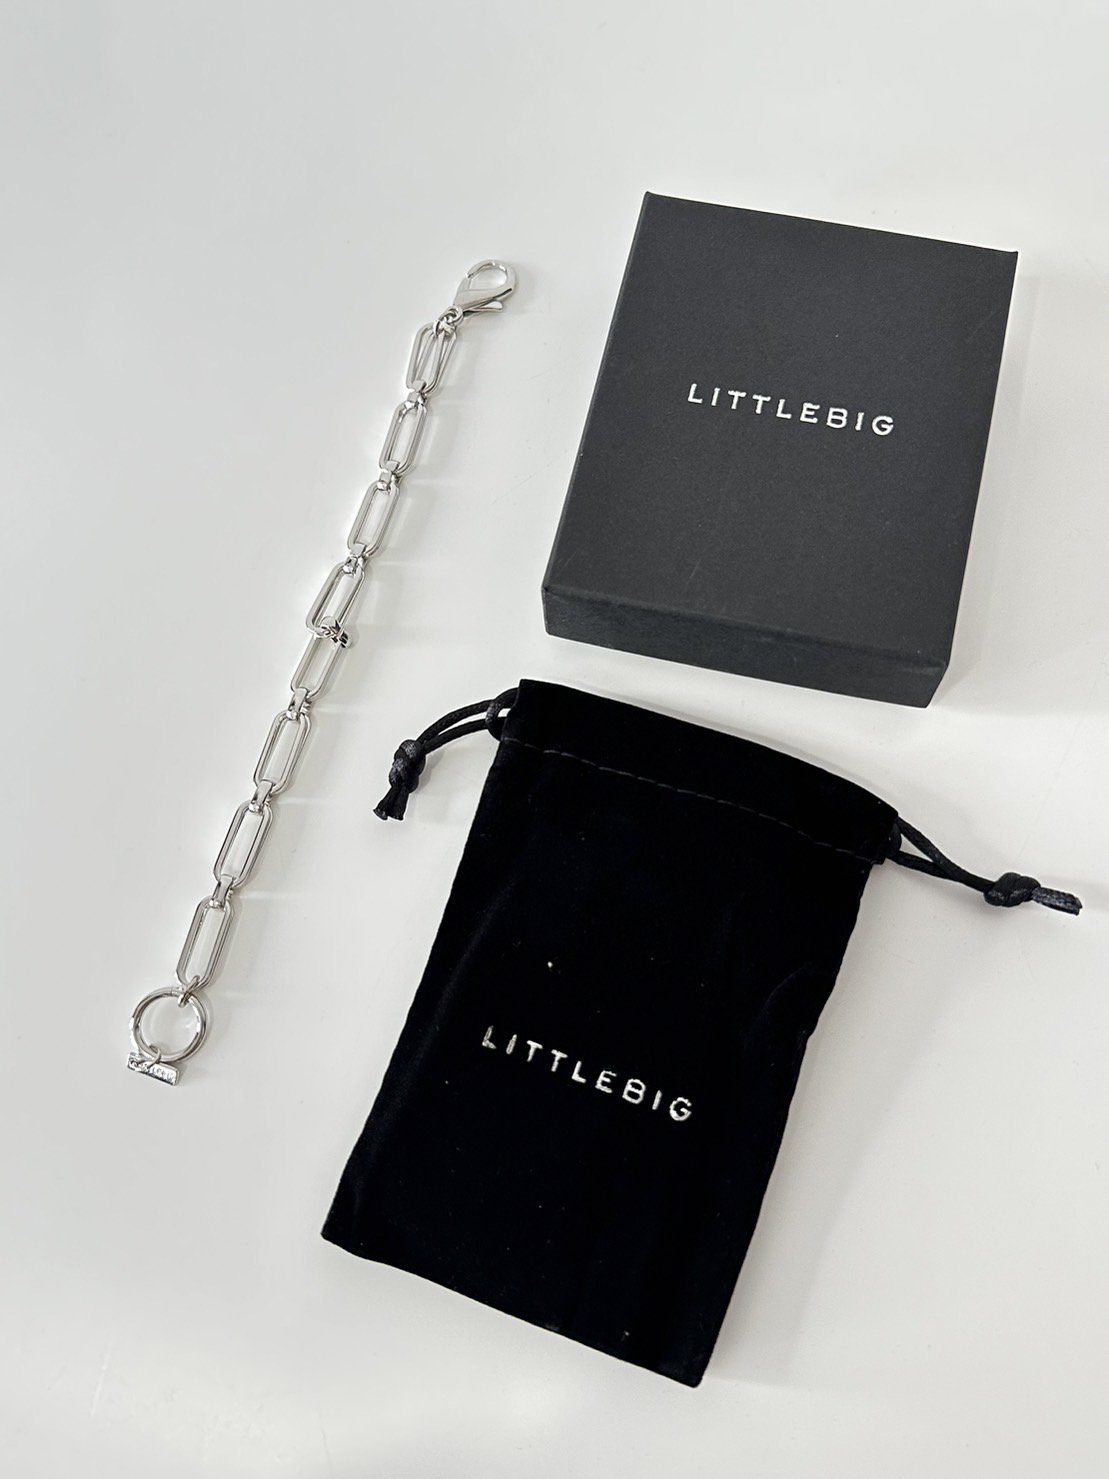 LITTLEBIG<br />ChainBracelet / Silver<img class='new_mark_img2' src='https://img.shop-pro.jp/img/new/icons47.gif' style='border:none;display:inline;margin:0px;padding:0px;width:auto;' />